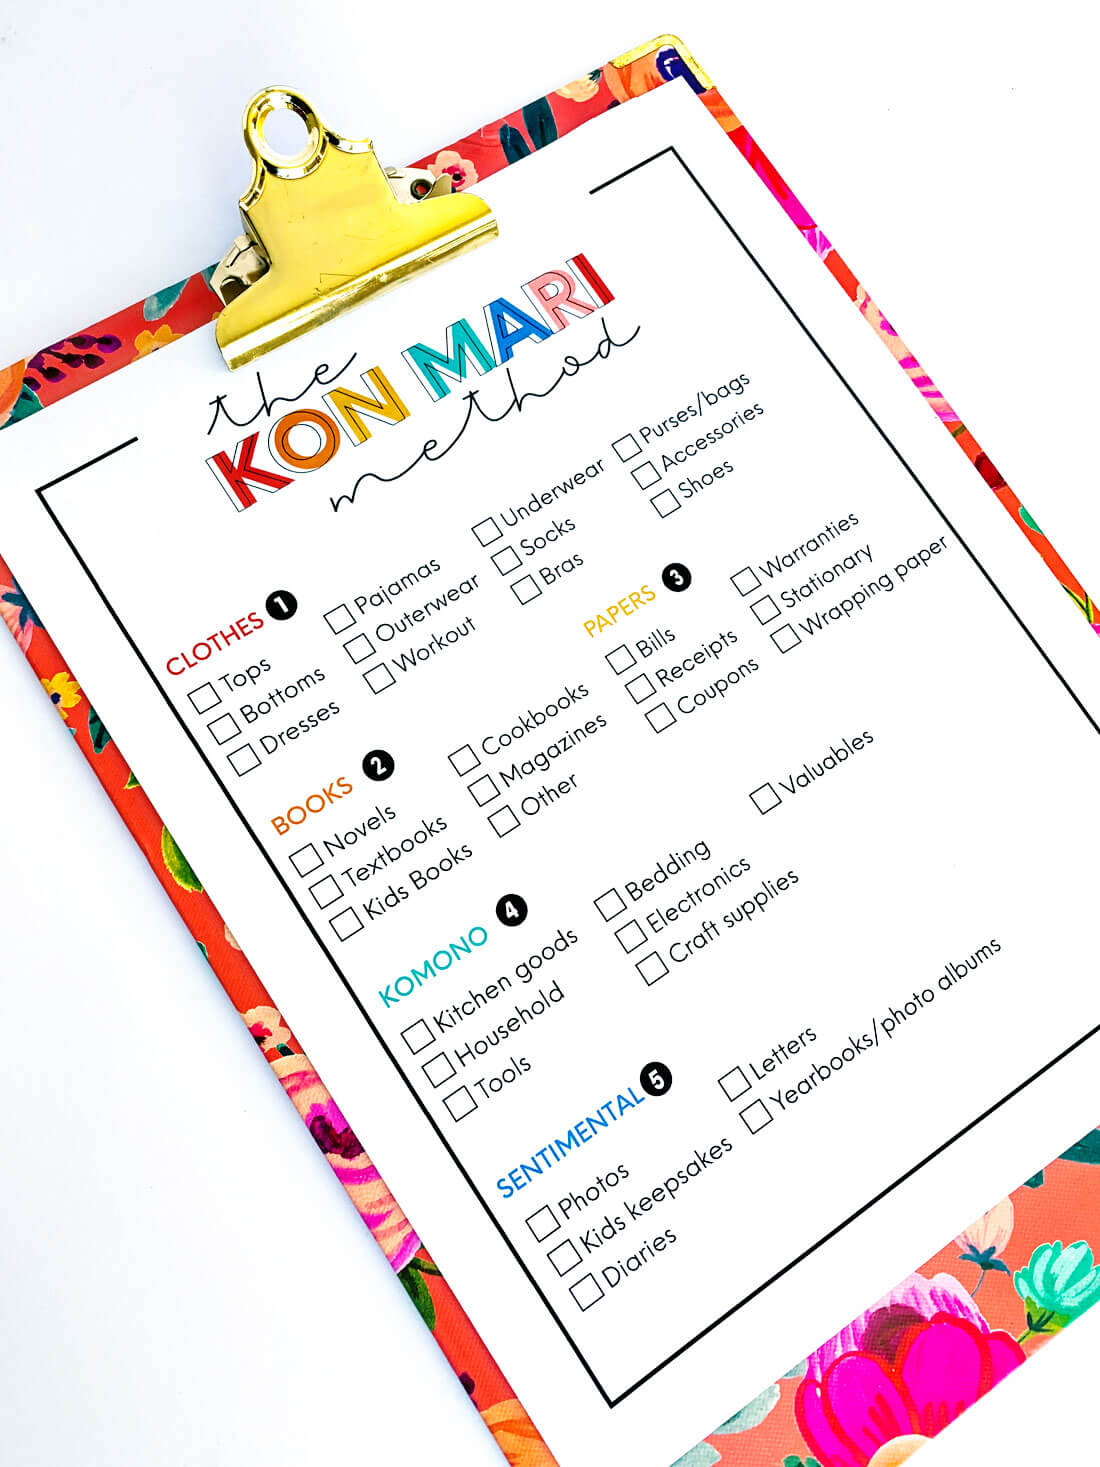 The KonMari Method Checklist - print this out and use to declutter your home! 